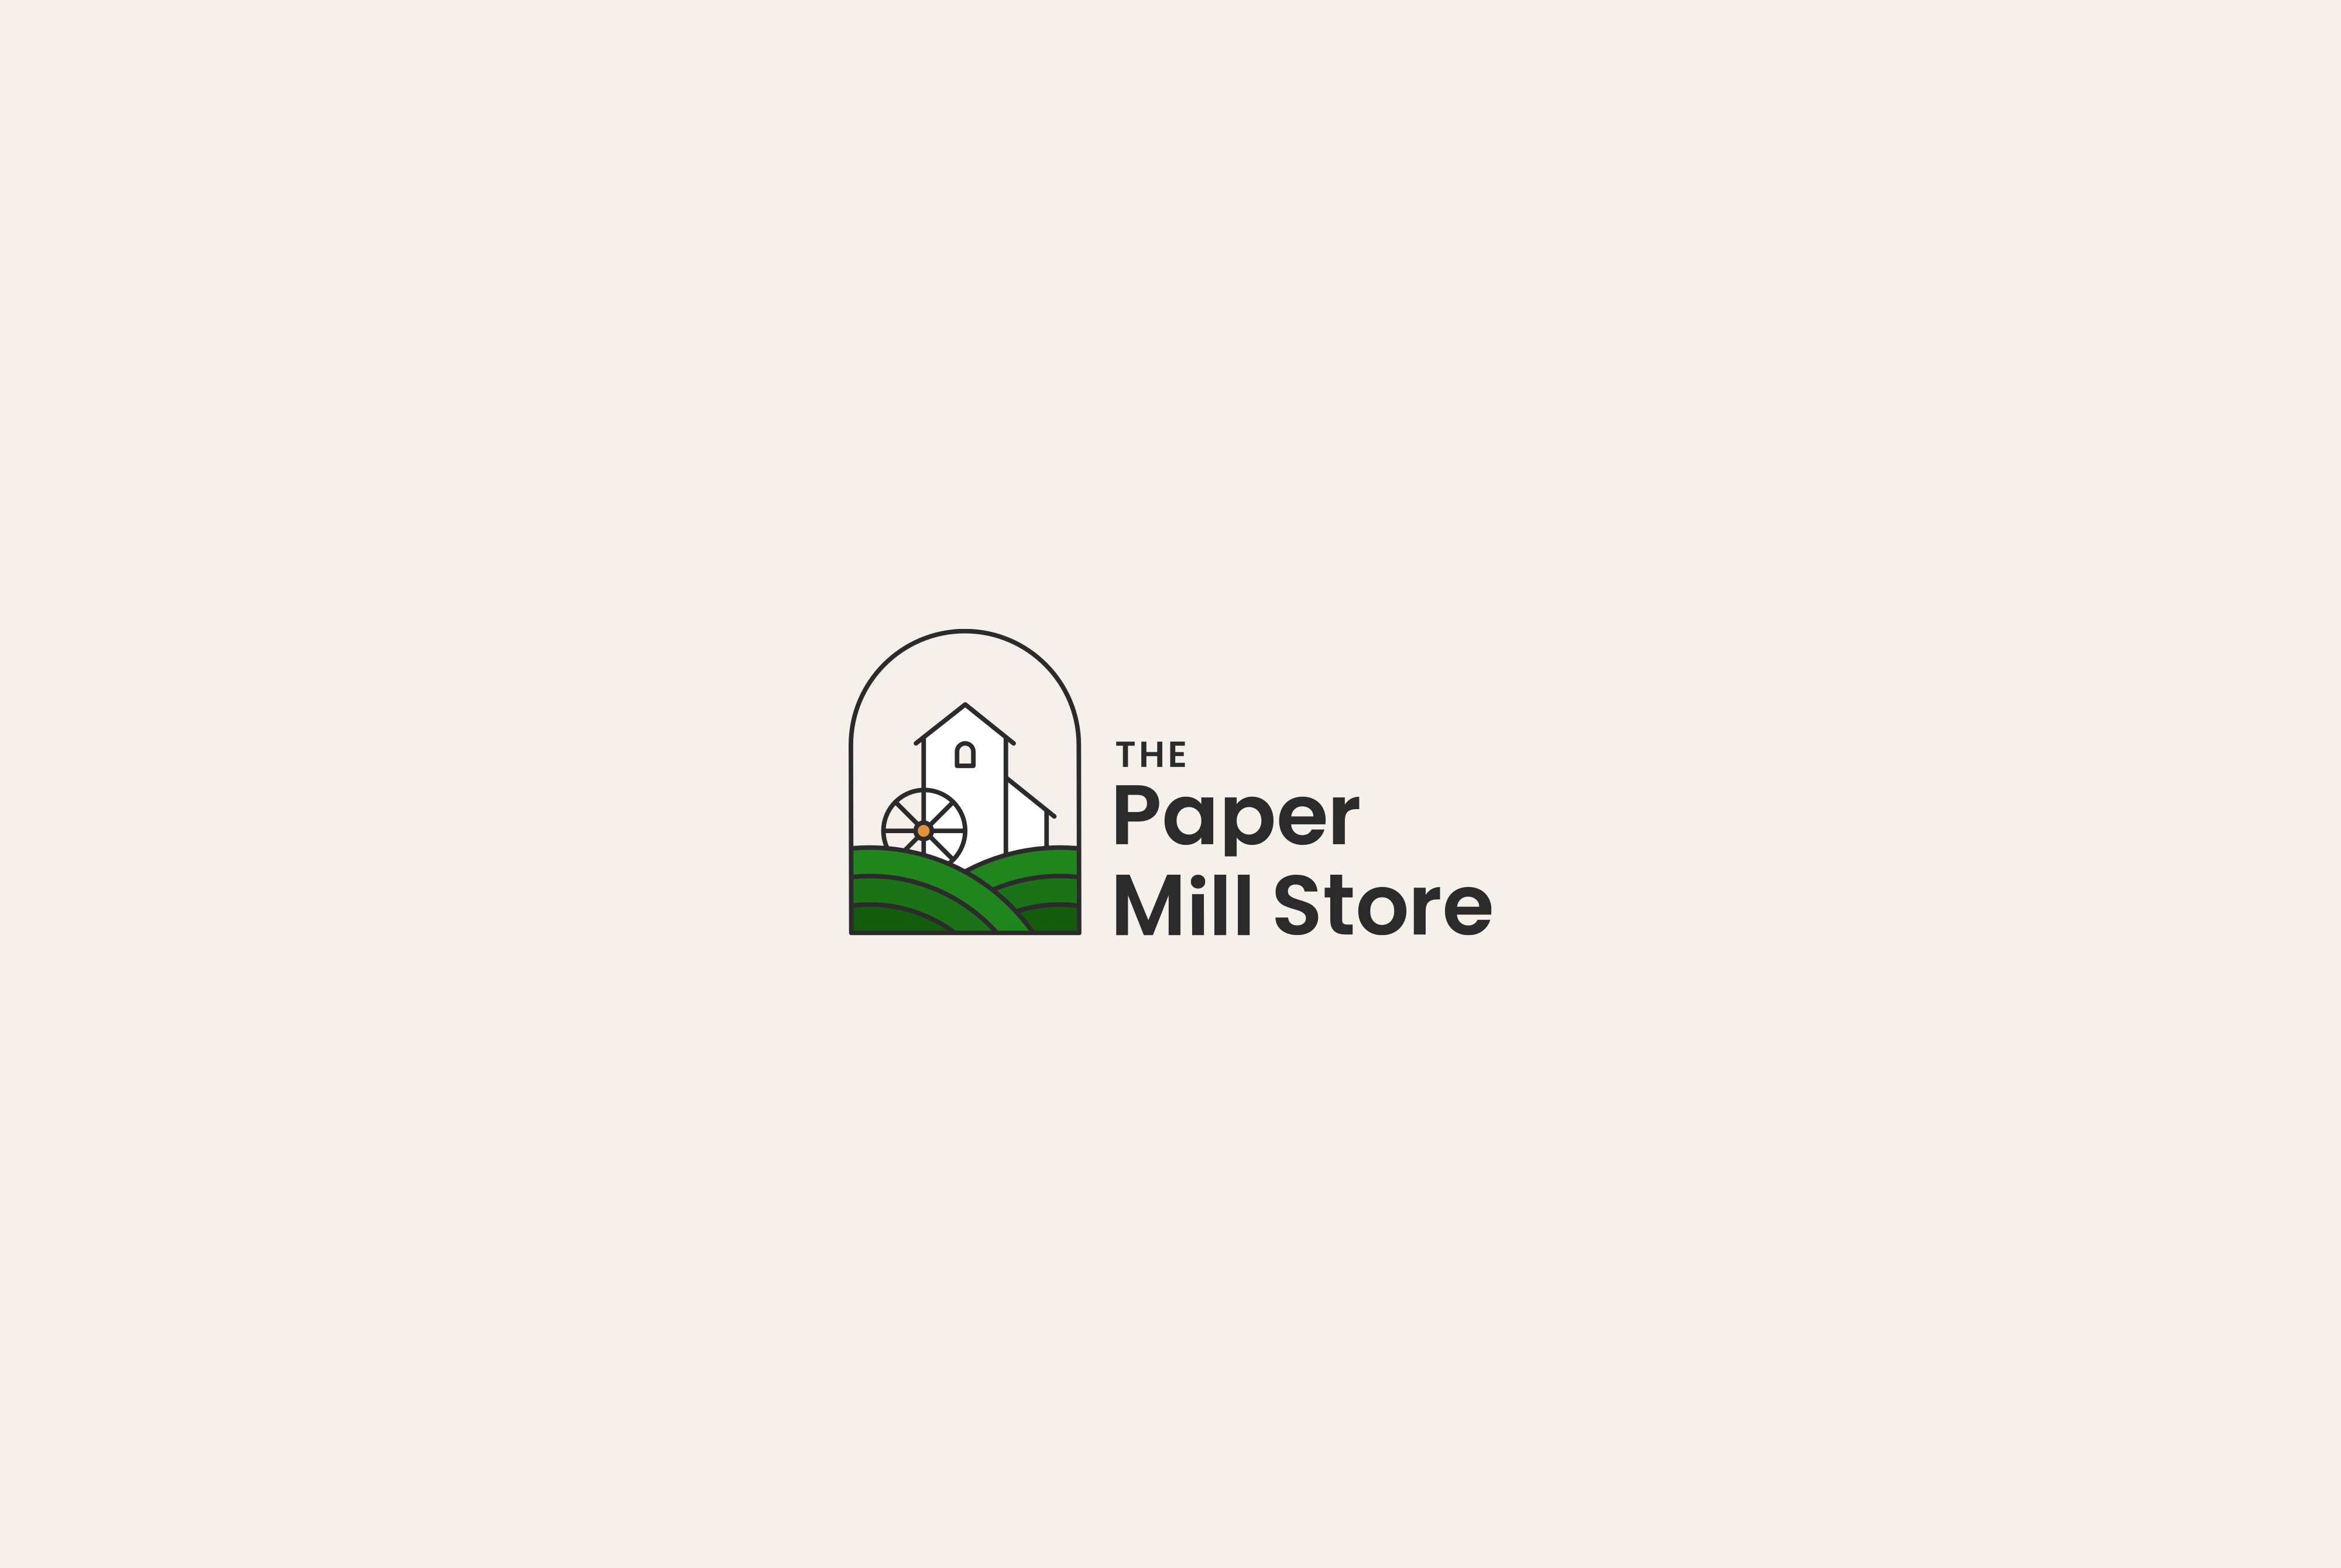 The Paper Mill Store